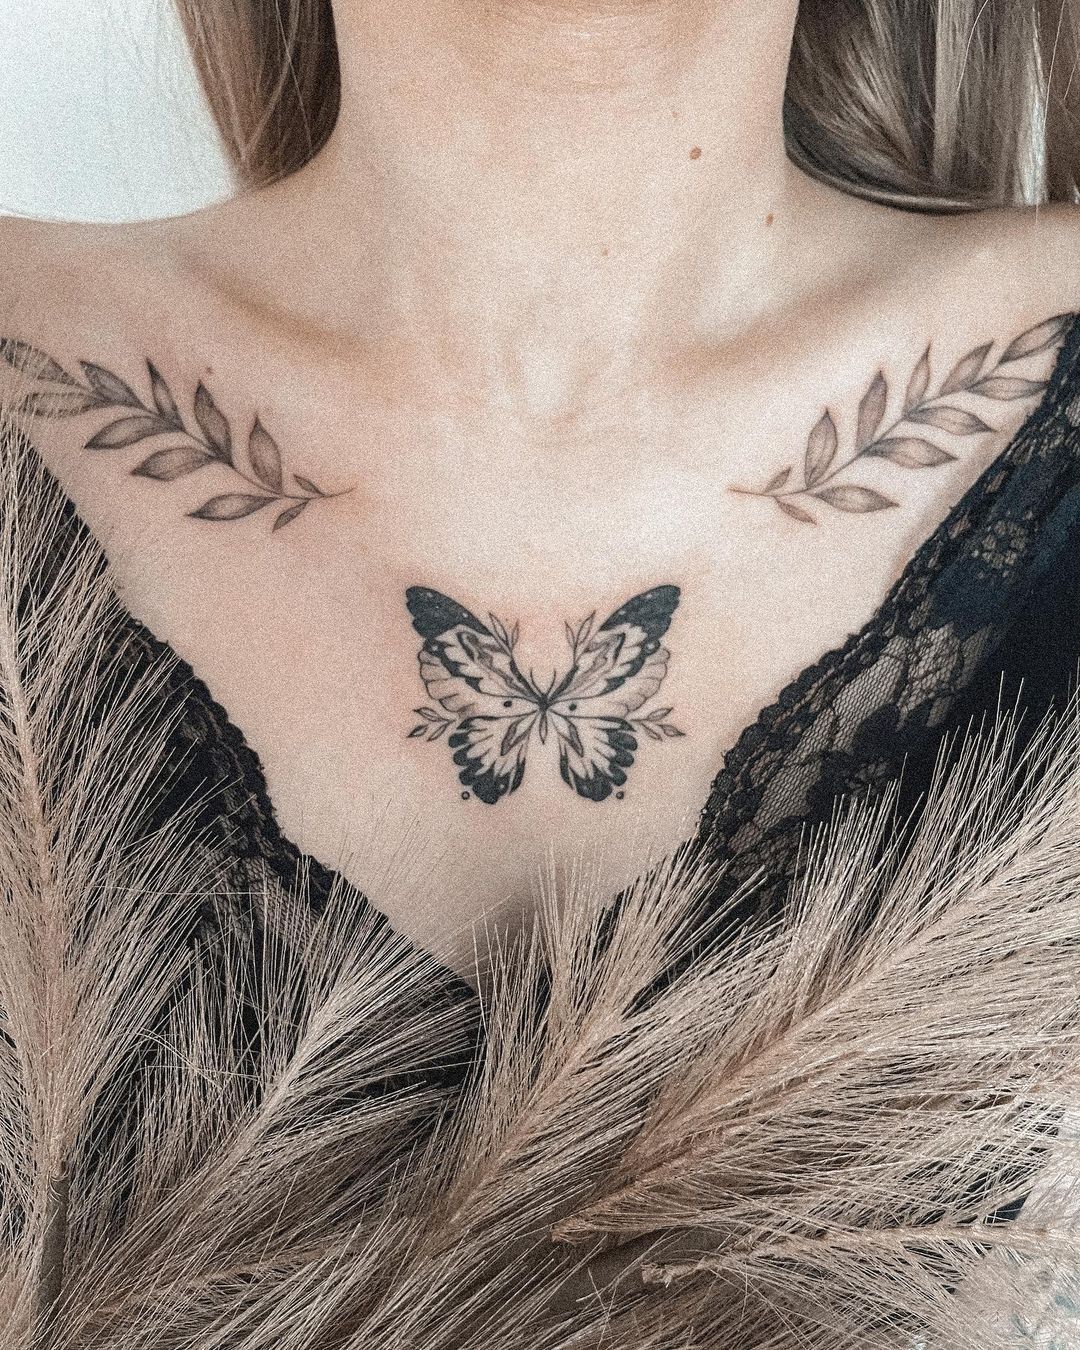 Top 100 Best Chest Tattoo Ideas for Women  Cool Female Designs  Cool chest  tattoos Chest tattoos for women Chest tattoo